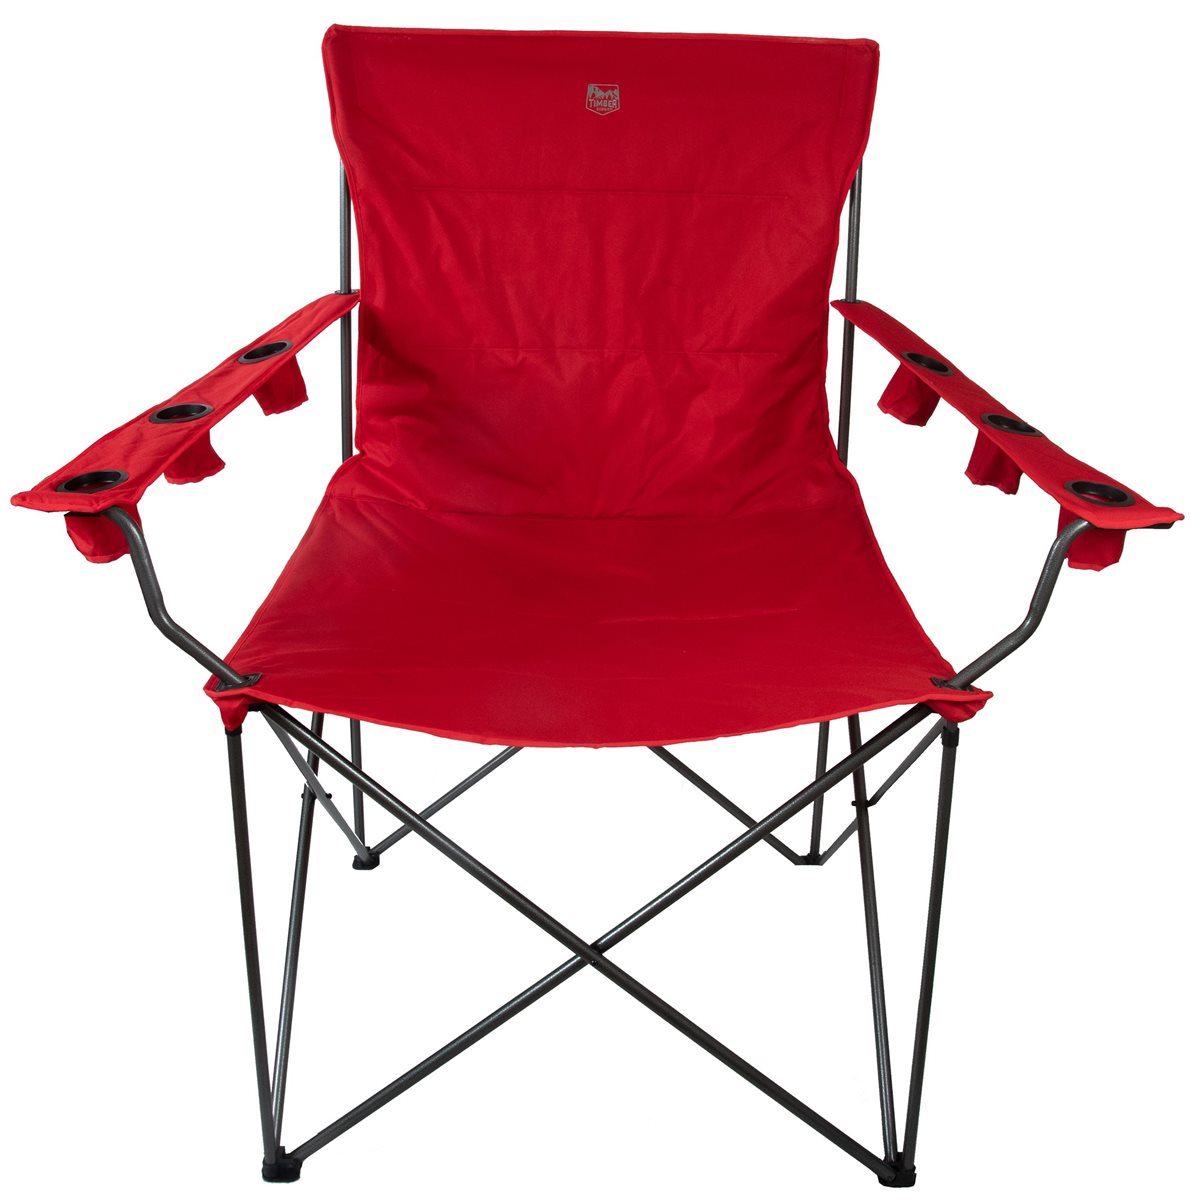 GIANT Folding Chair from Costco - Worth It? 